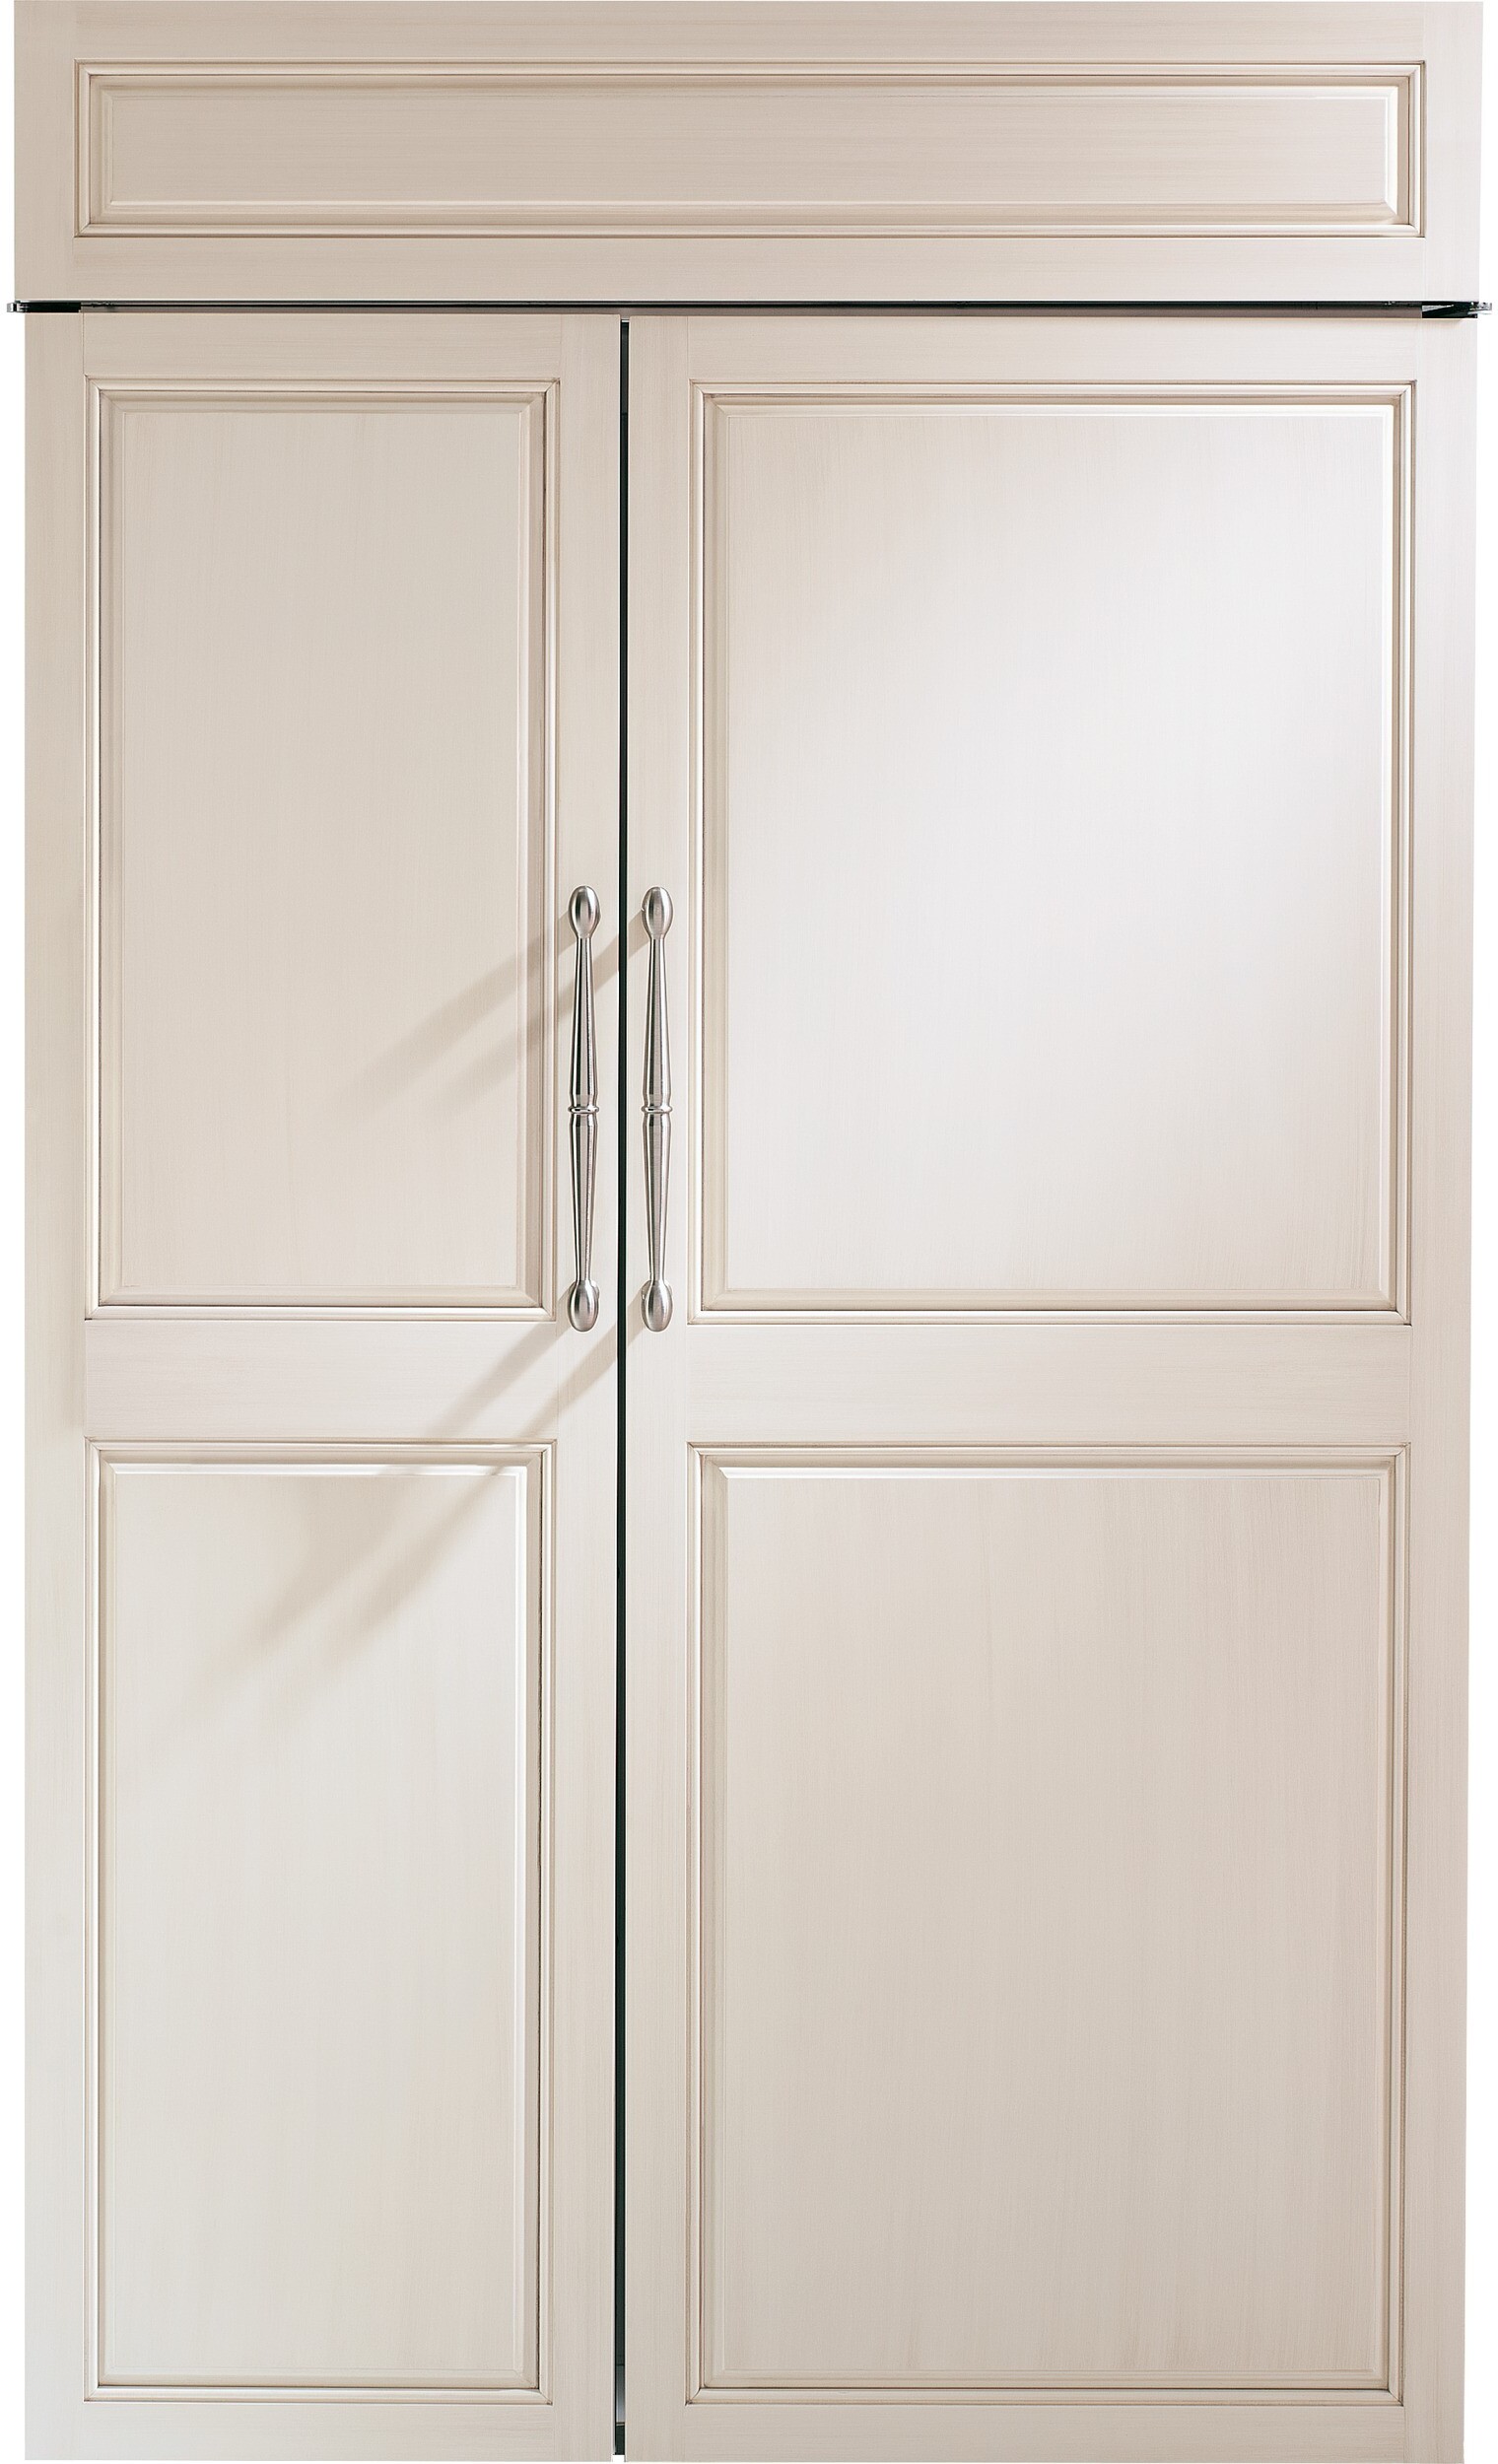 Monogram 48 Inch 48 Built In Counter Depth Side-by-Side Refrigerator ZIS480NNII